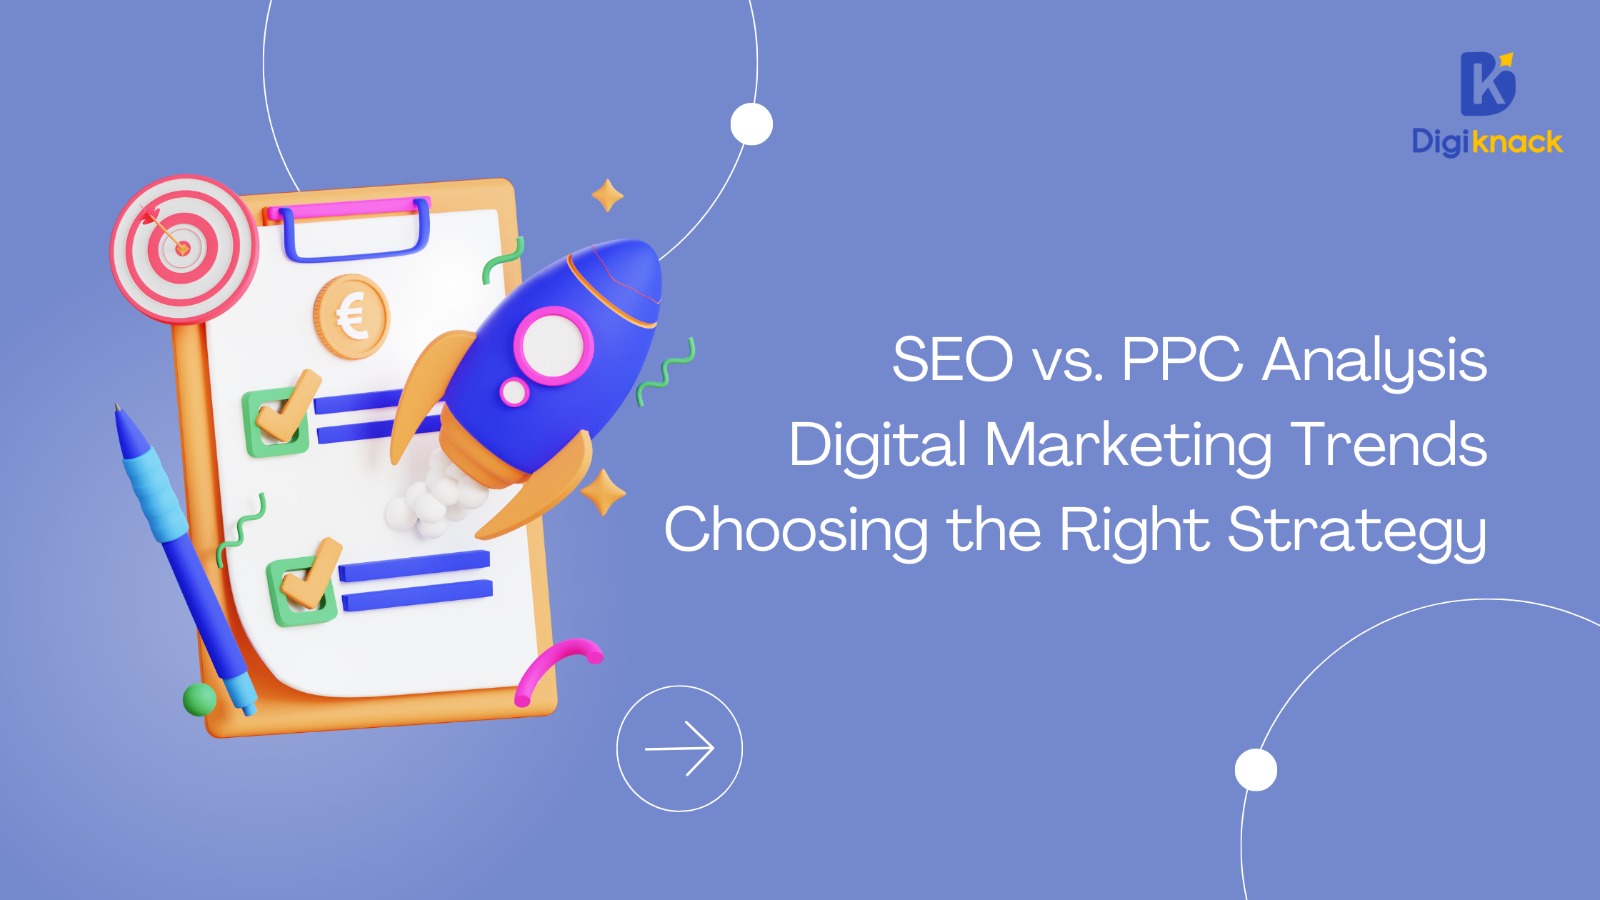 SEO vs. PPC: Which Strategy is Best for Your Digital Marketing Company?